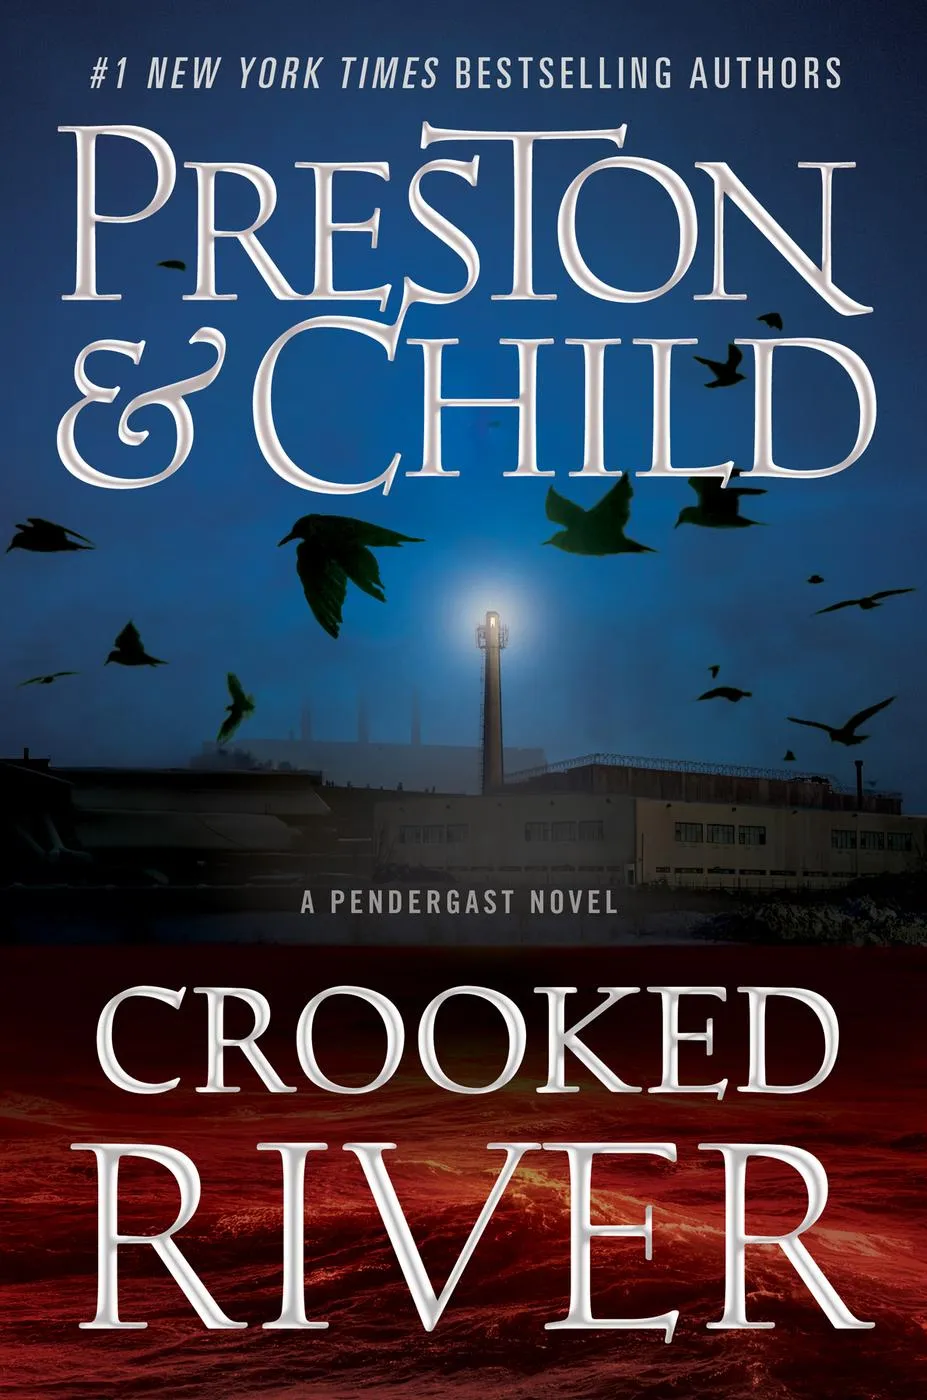 Crooked River (Agent Pendergast #19)